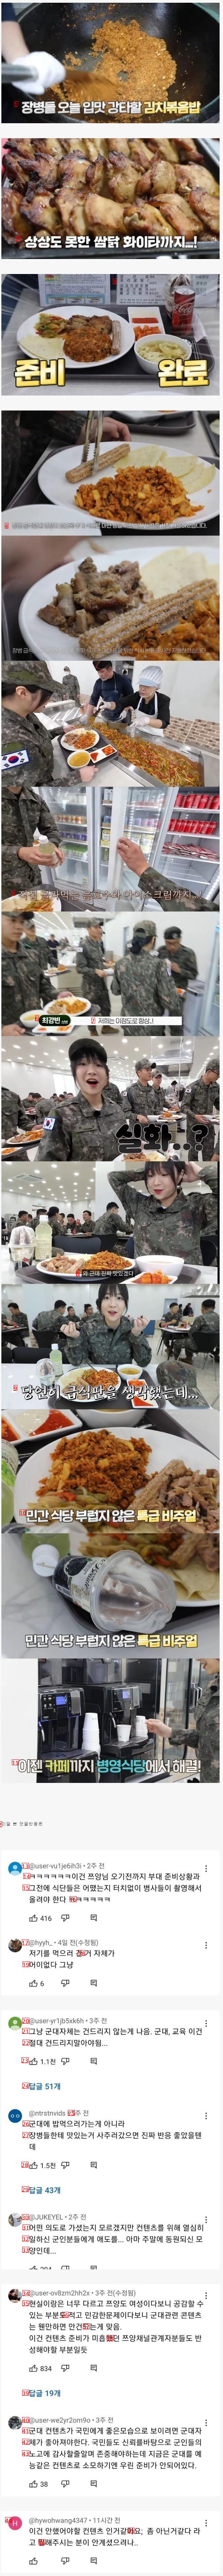 Tzuyang Military Meal Controversy